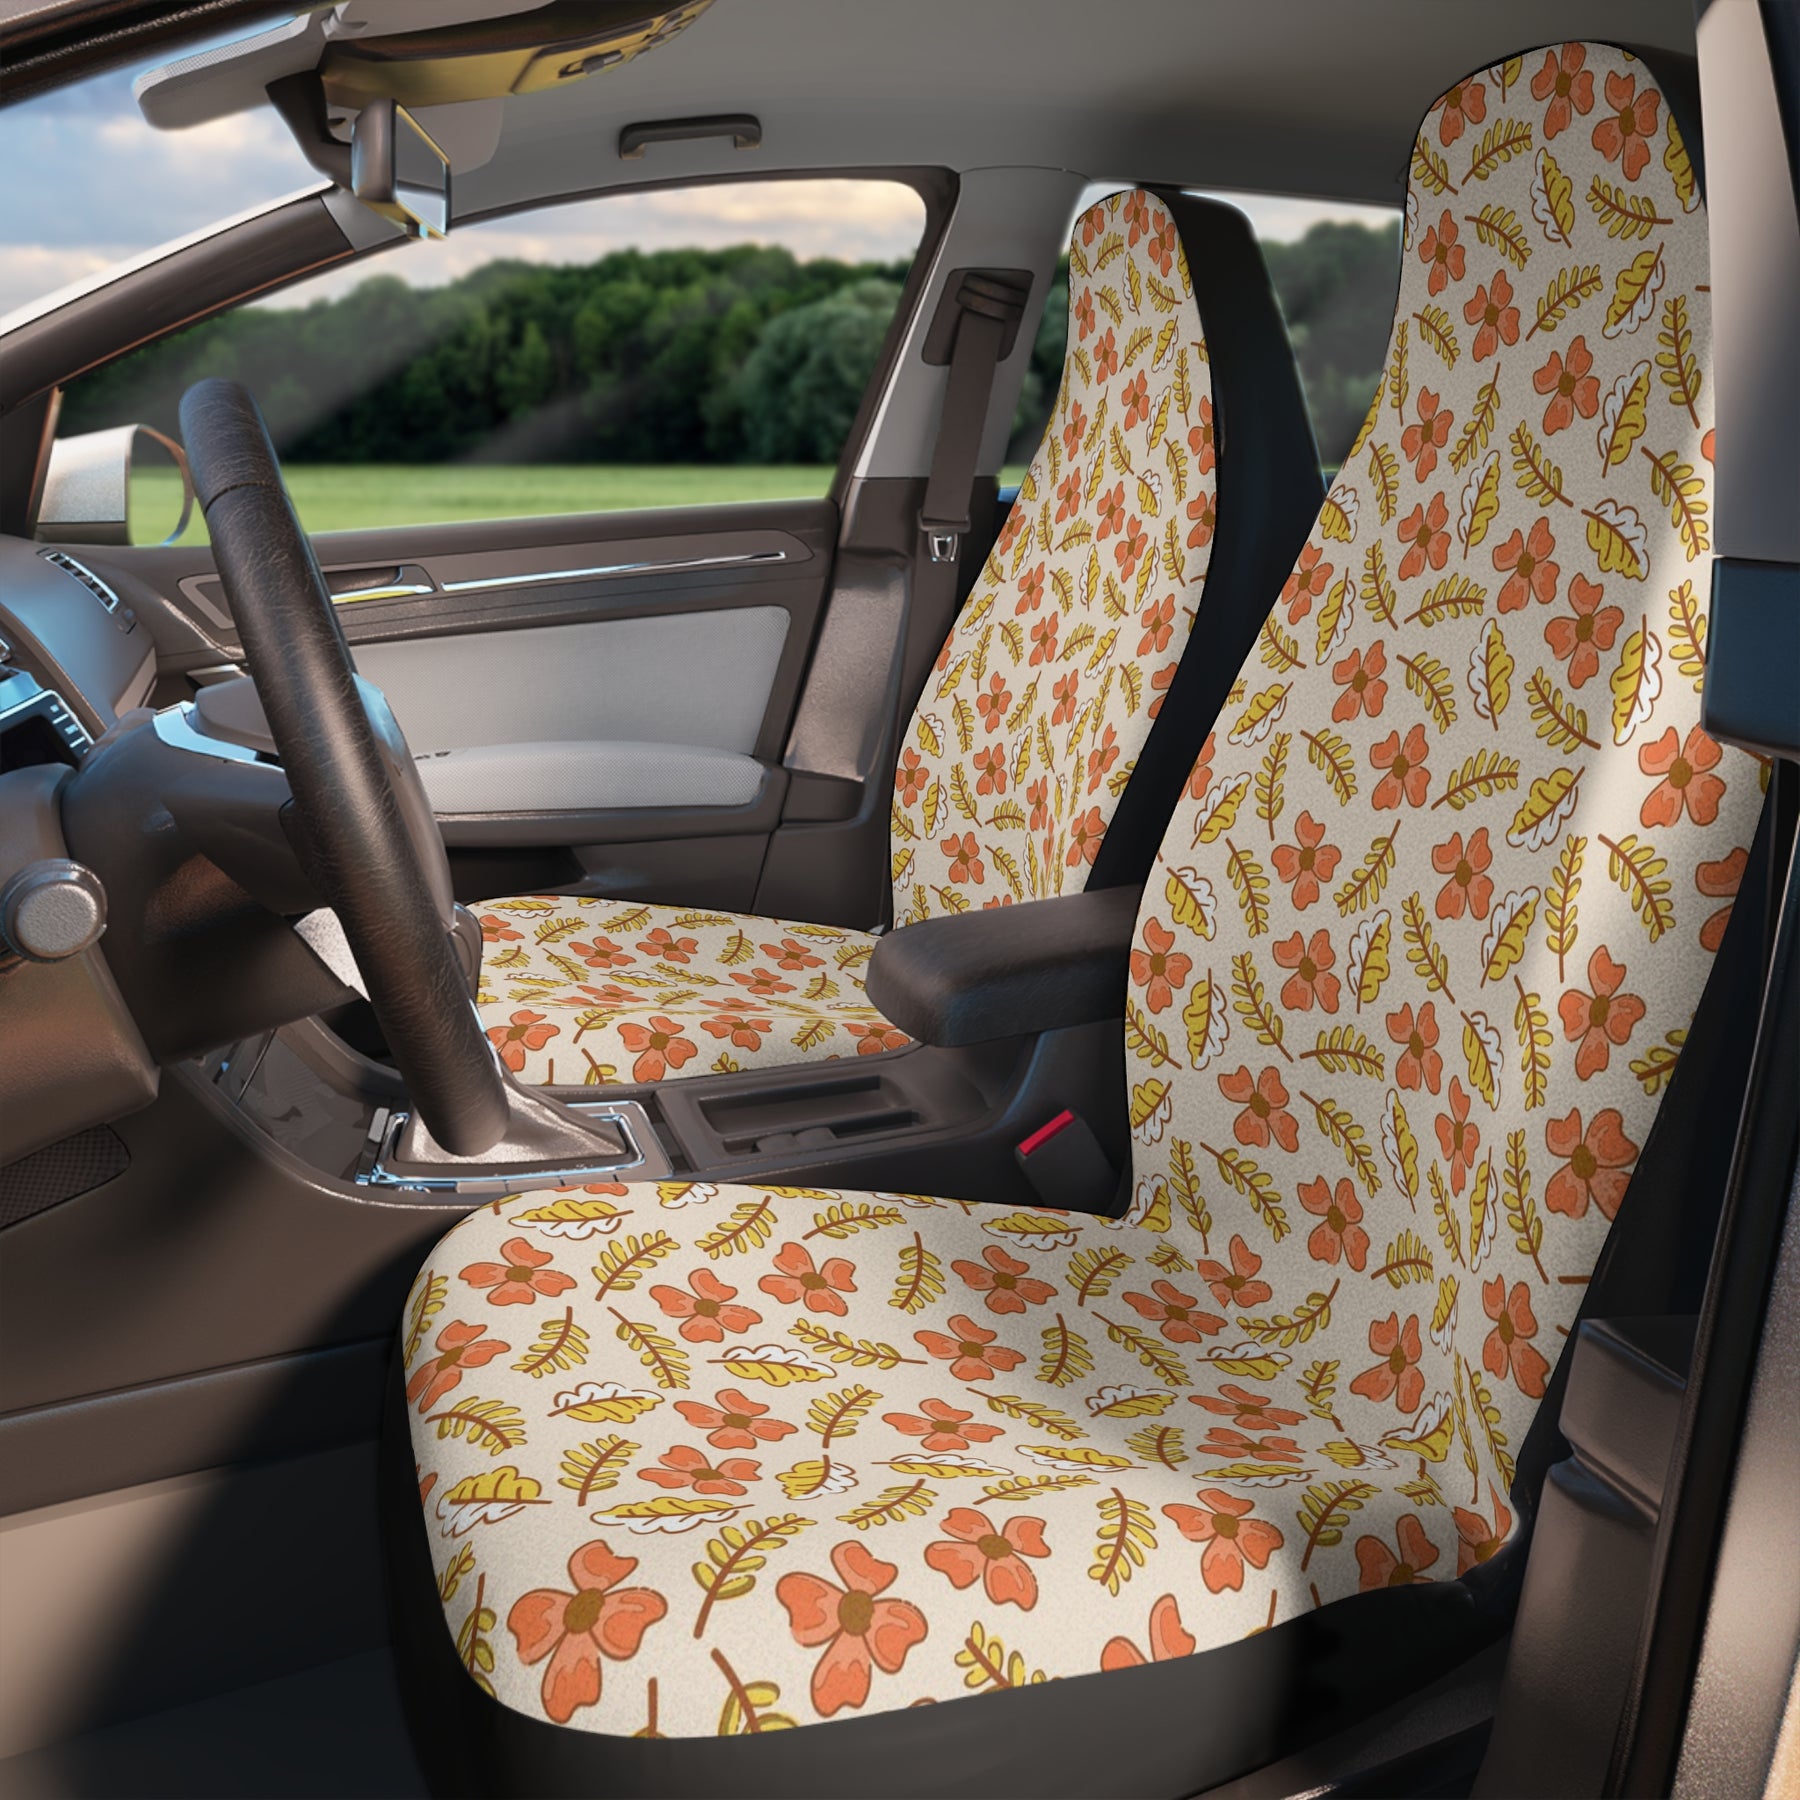 Cottagecore flower pattern Car Seat Covers Set, Aesthetic floral Car Seat Cover, Gift for new driver,Good vibes boho cute car Accessories